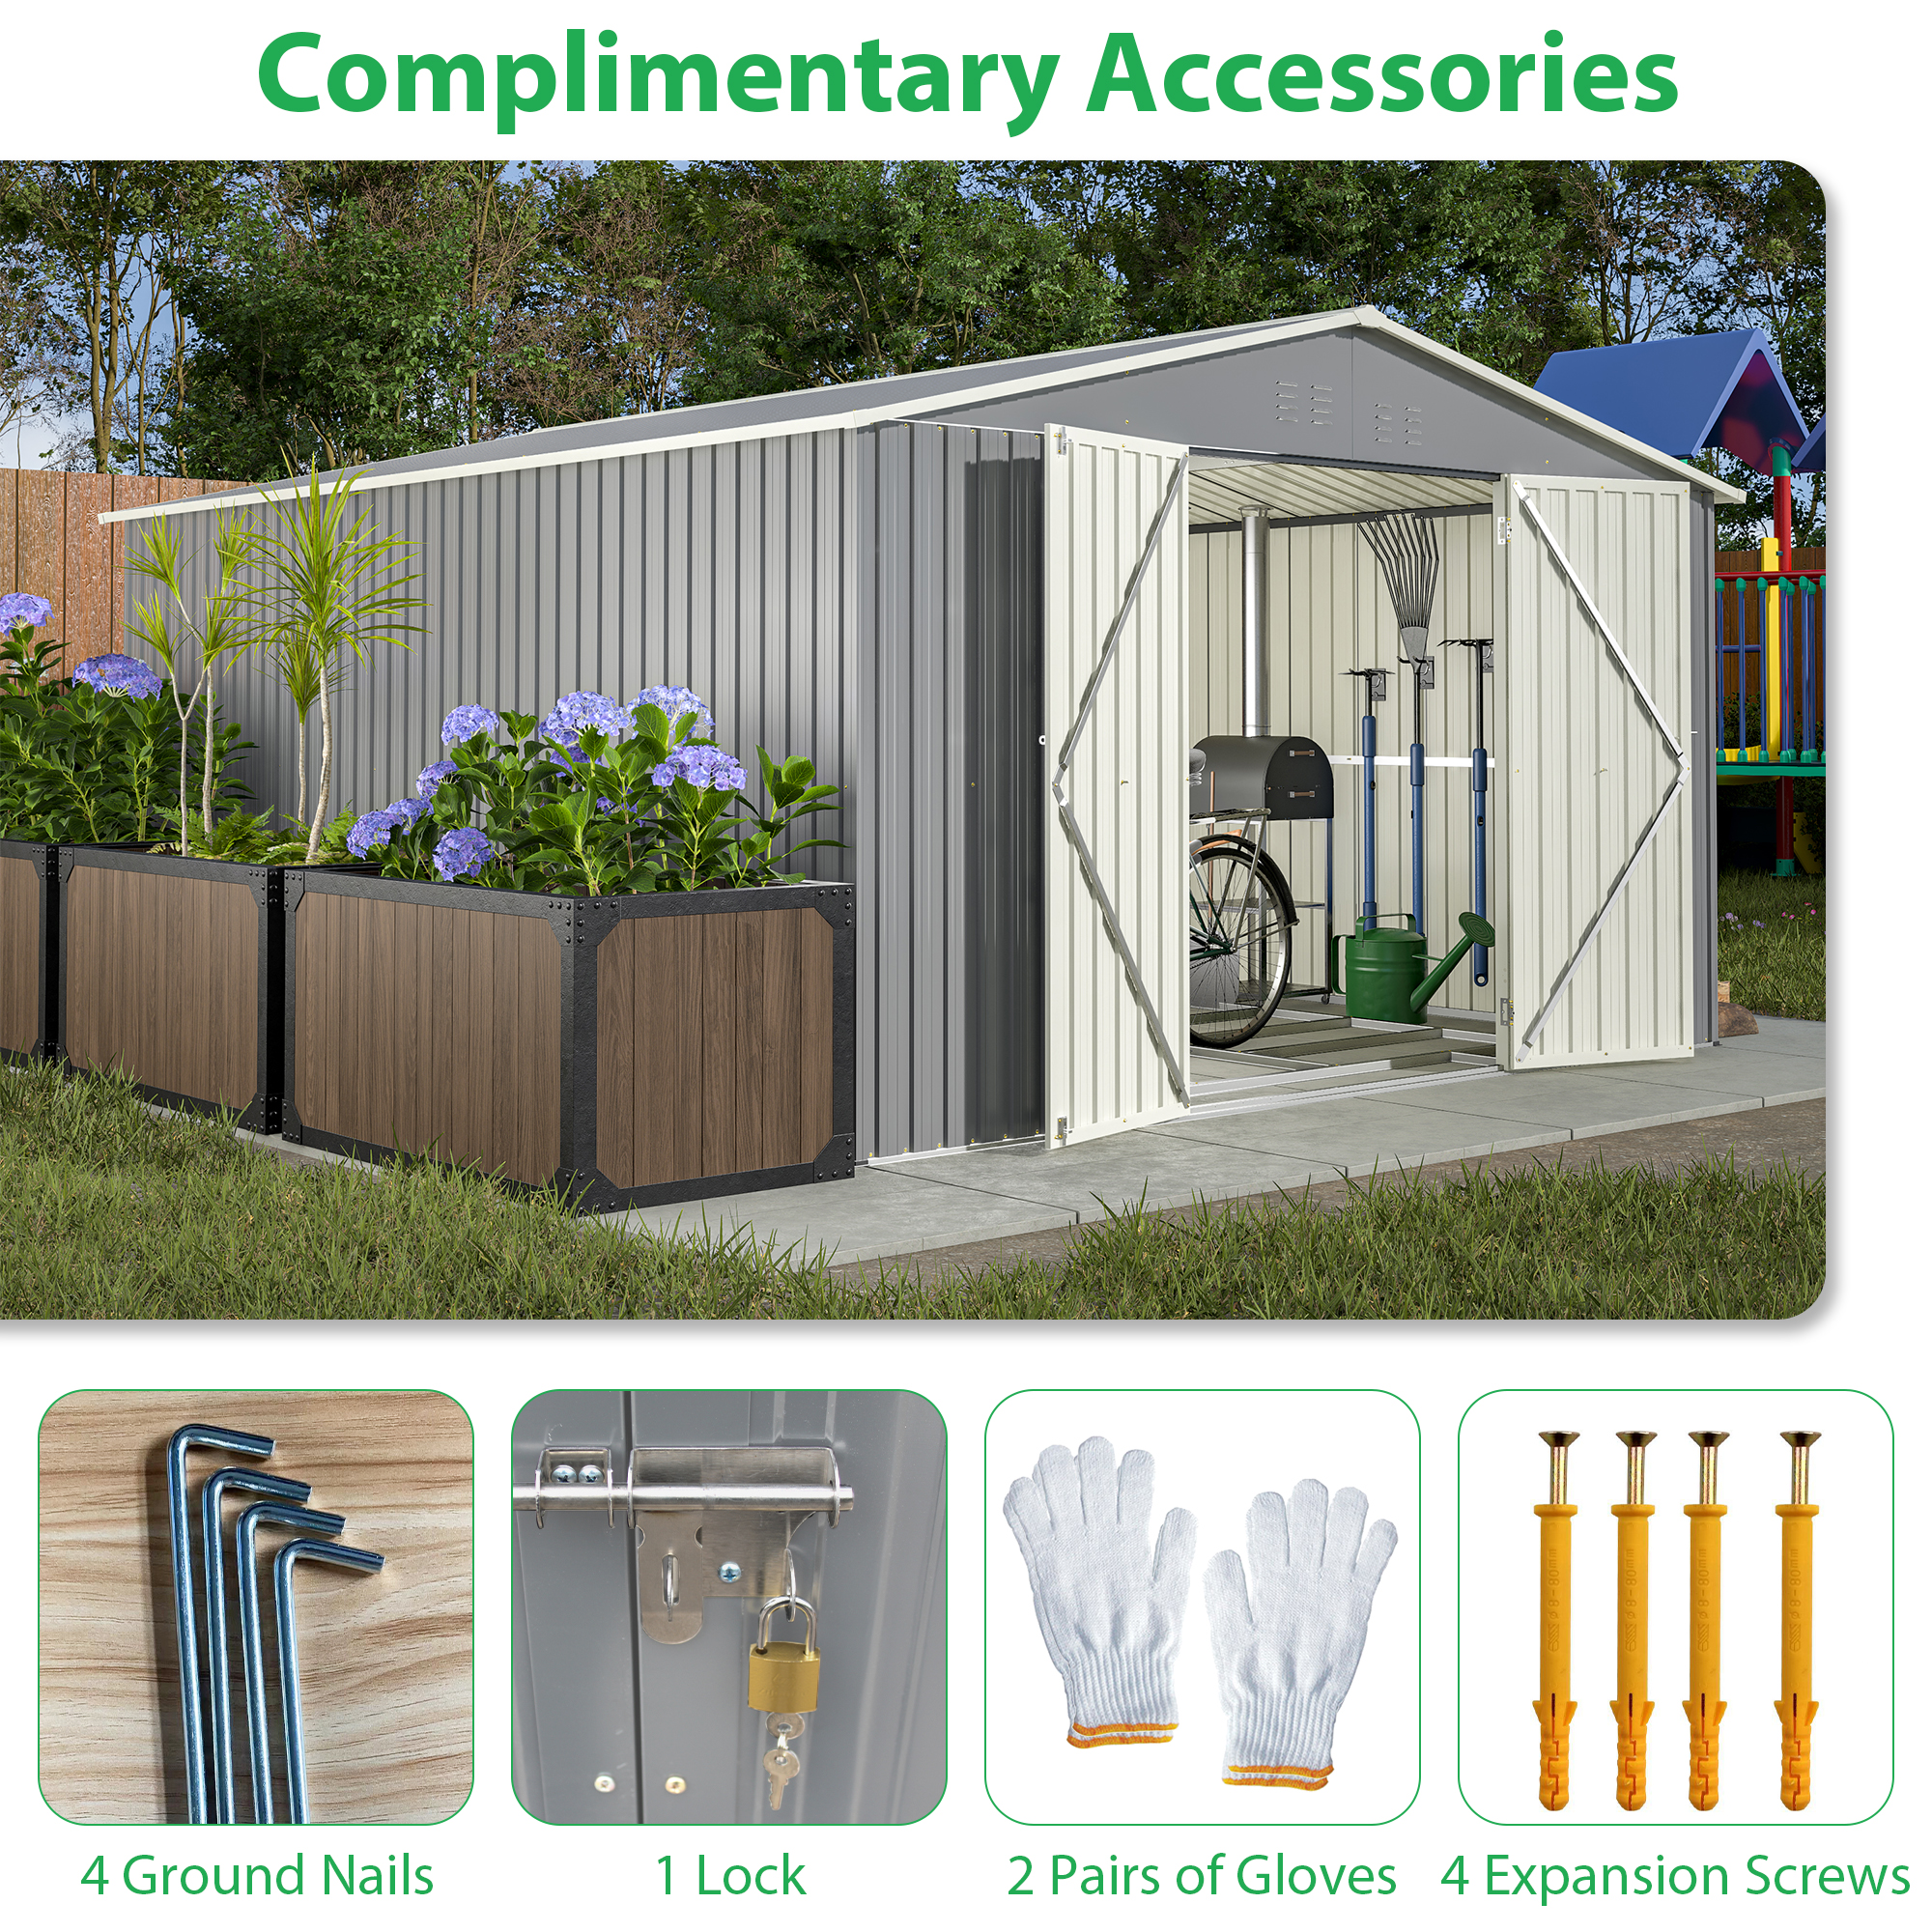 LZBEITEM 11 x 13 ft. Outdoor Metal Storage Shed with Floor Frame Kit, Galvanized Steel Garden Shed, Metal Garden Tool Shed with Lockable for Backyard Patio, Gray, 133.68 x 161.4 x 80.76 in，140.5 sq ft - image 3 of 13